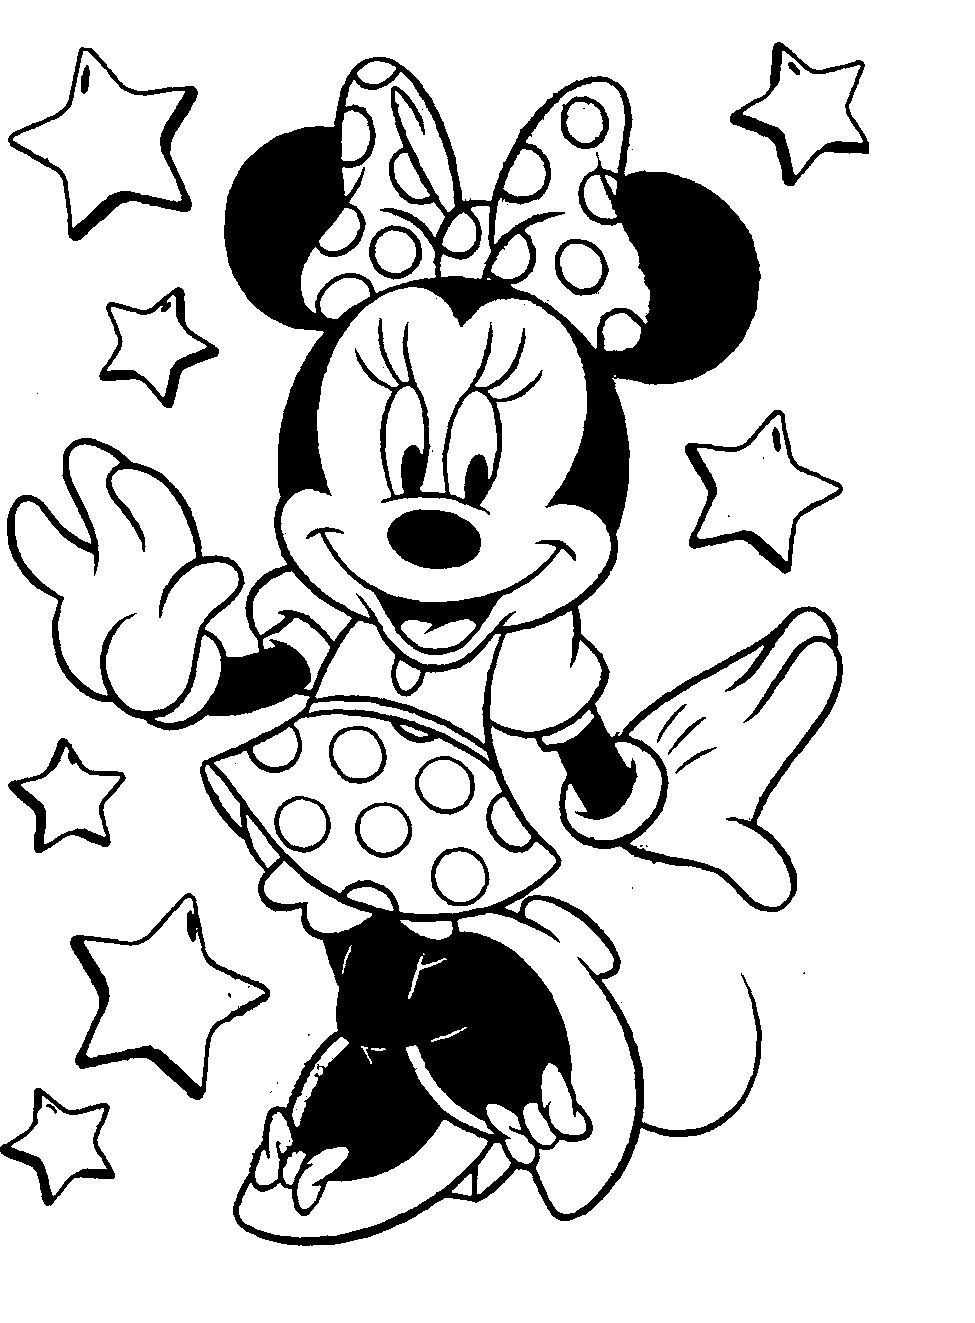 Mini Mouse Printable Coloring Pages
 Pin by Karen Dauterive on Designs